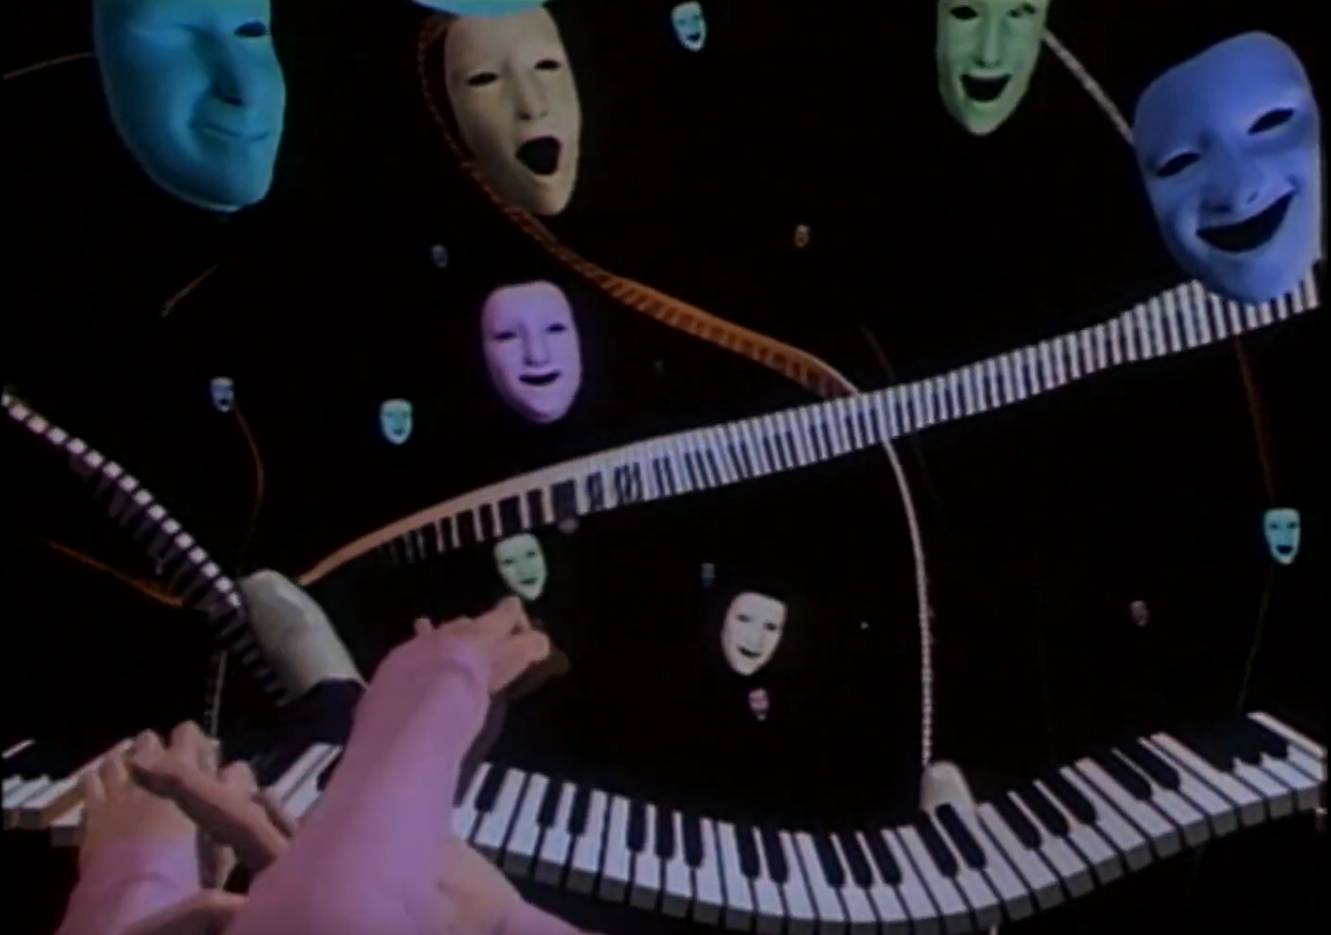 Tony de Peltrie, creepy-looking CGI animation of a piano player from 1985. Surreal piano with floating theatrical face masks.